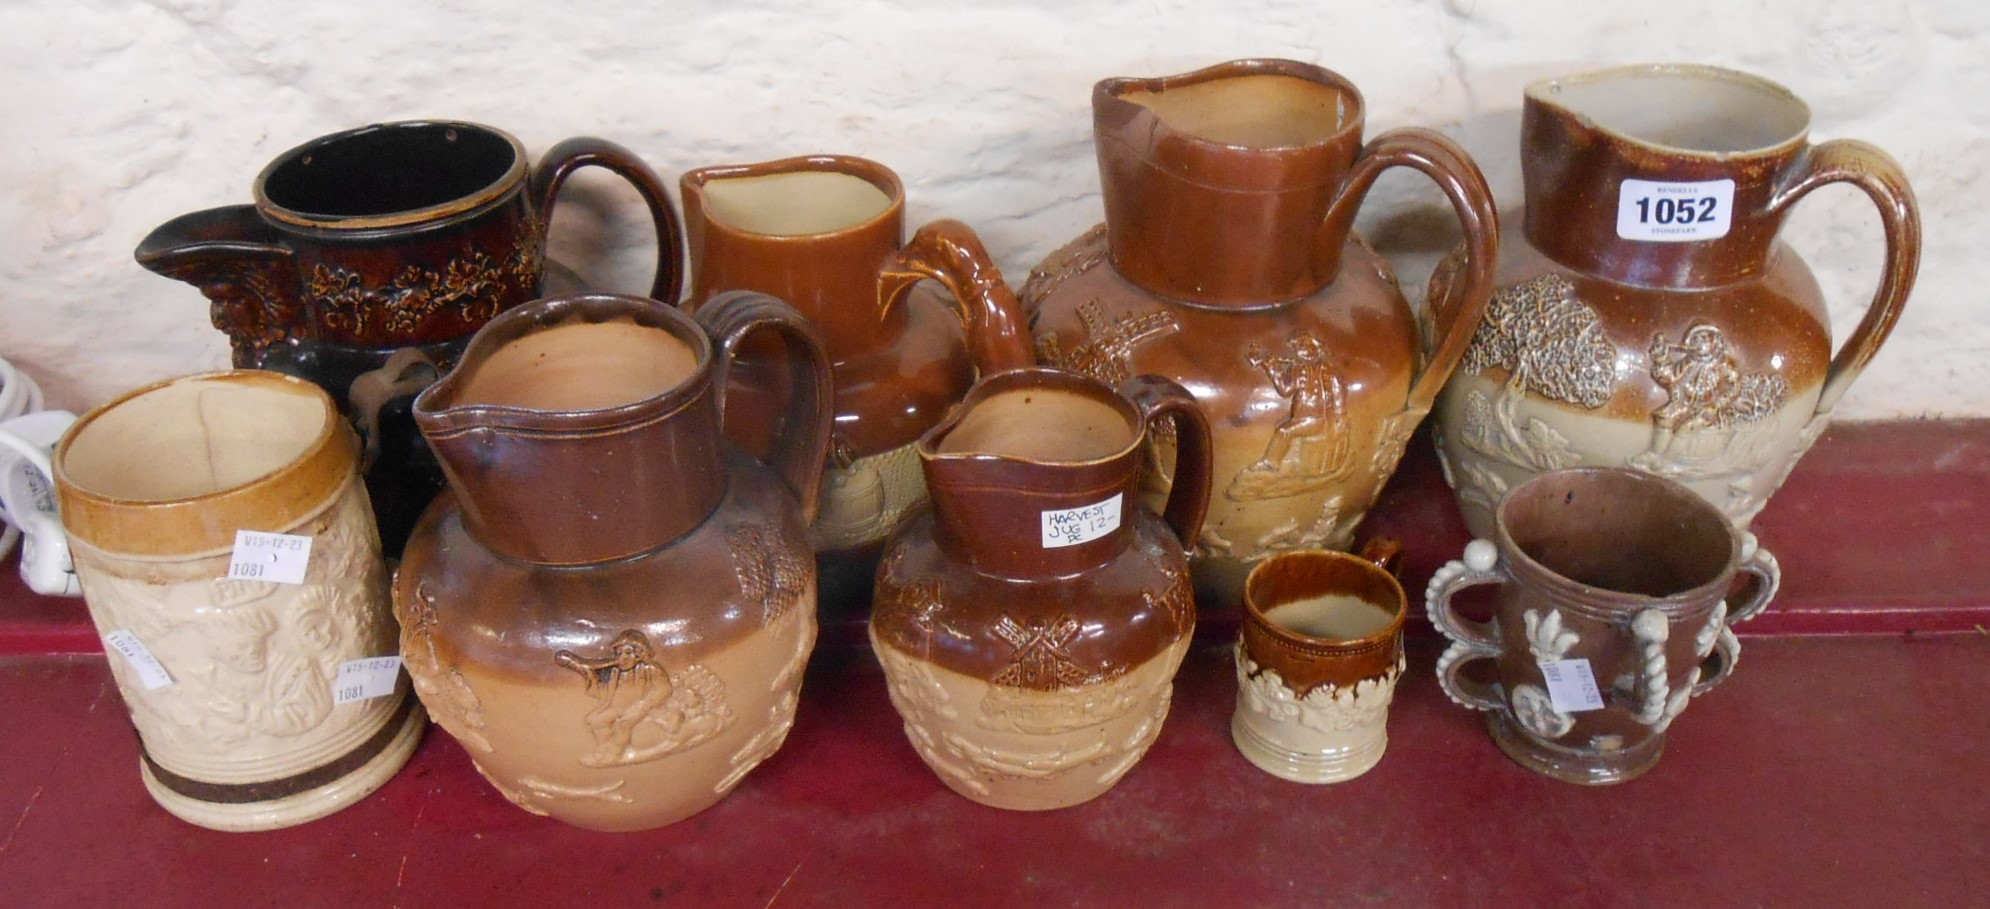 A quantity of 19th Century salt glazed and other stoneware harvest jugs, mugs, etc. - various